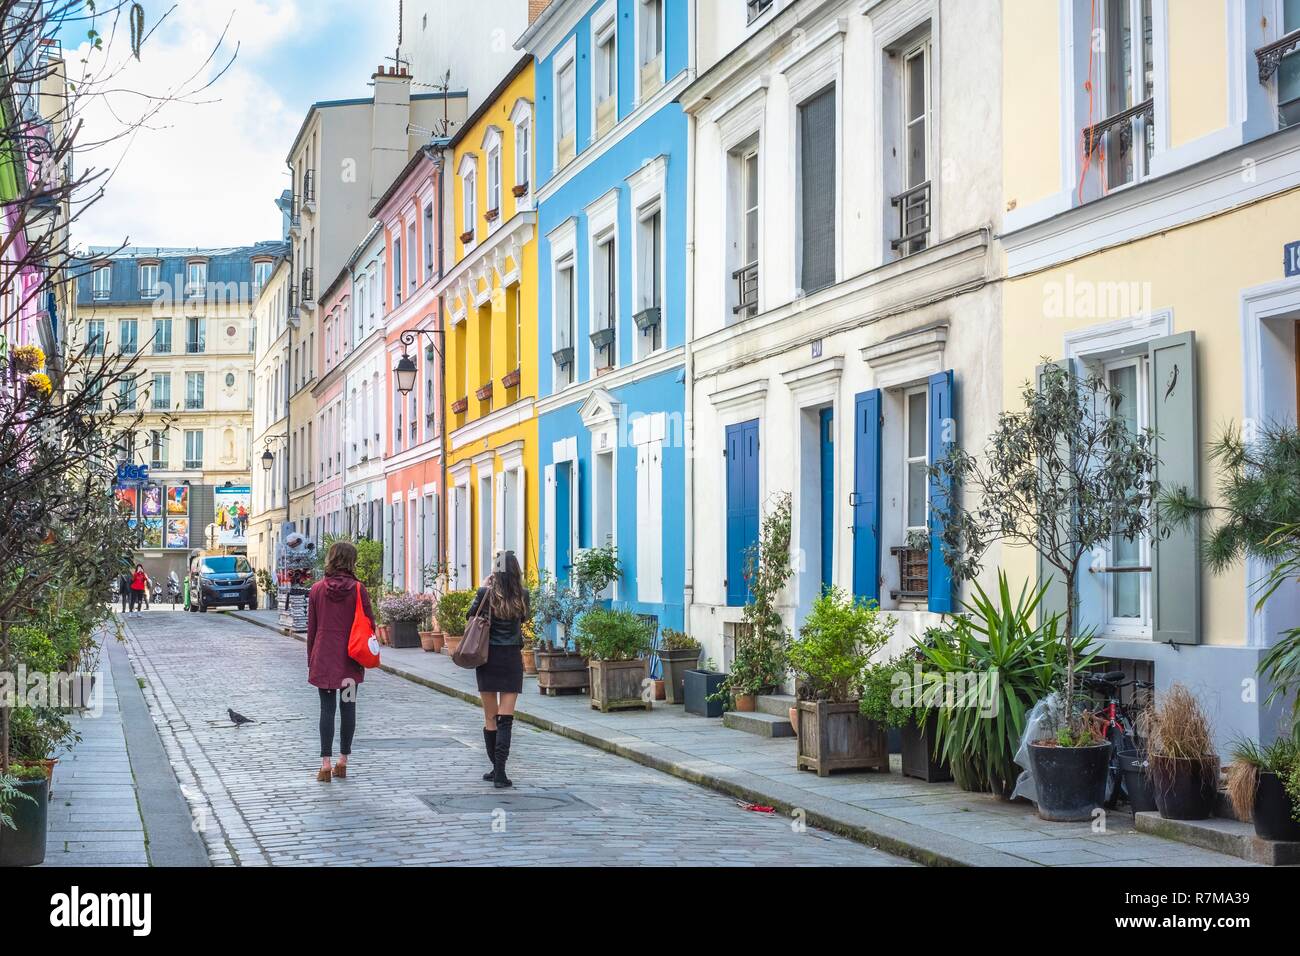 France, Paris, Quinze-Vingts district, rue Cremieux is a pedestrian and paved street, lined with small pavilions with colorful facades Stock Photo